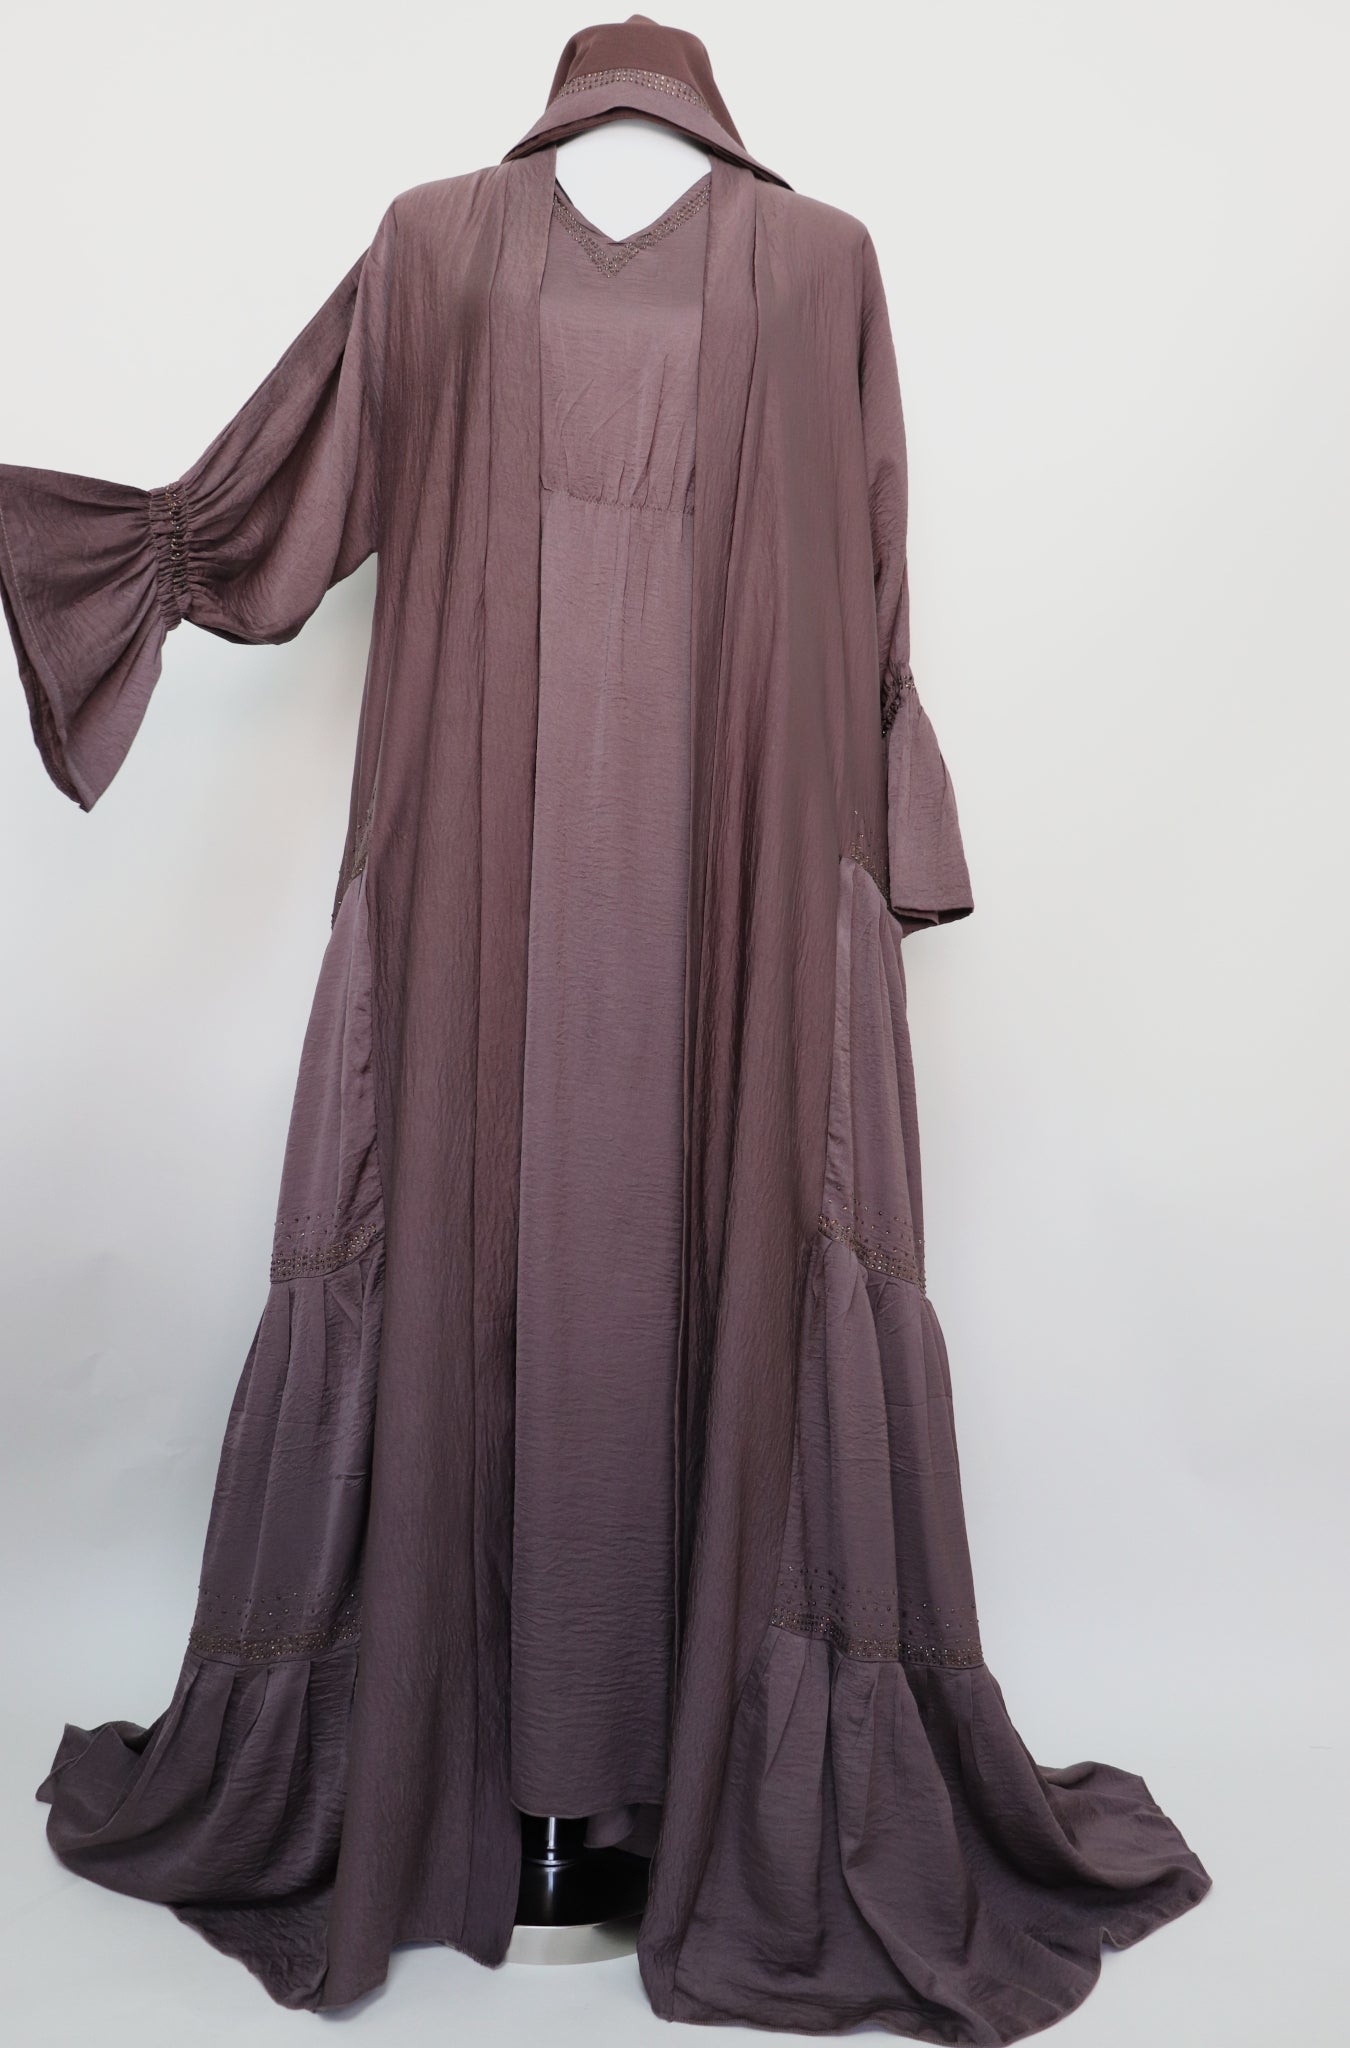 3 Piece Set Open Tiered Abaya - Cocoa